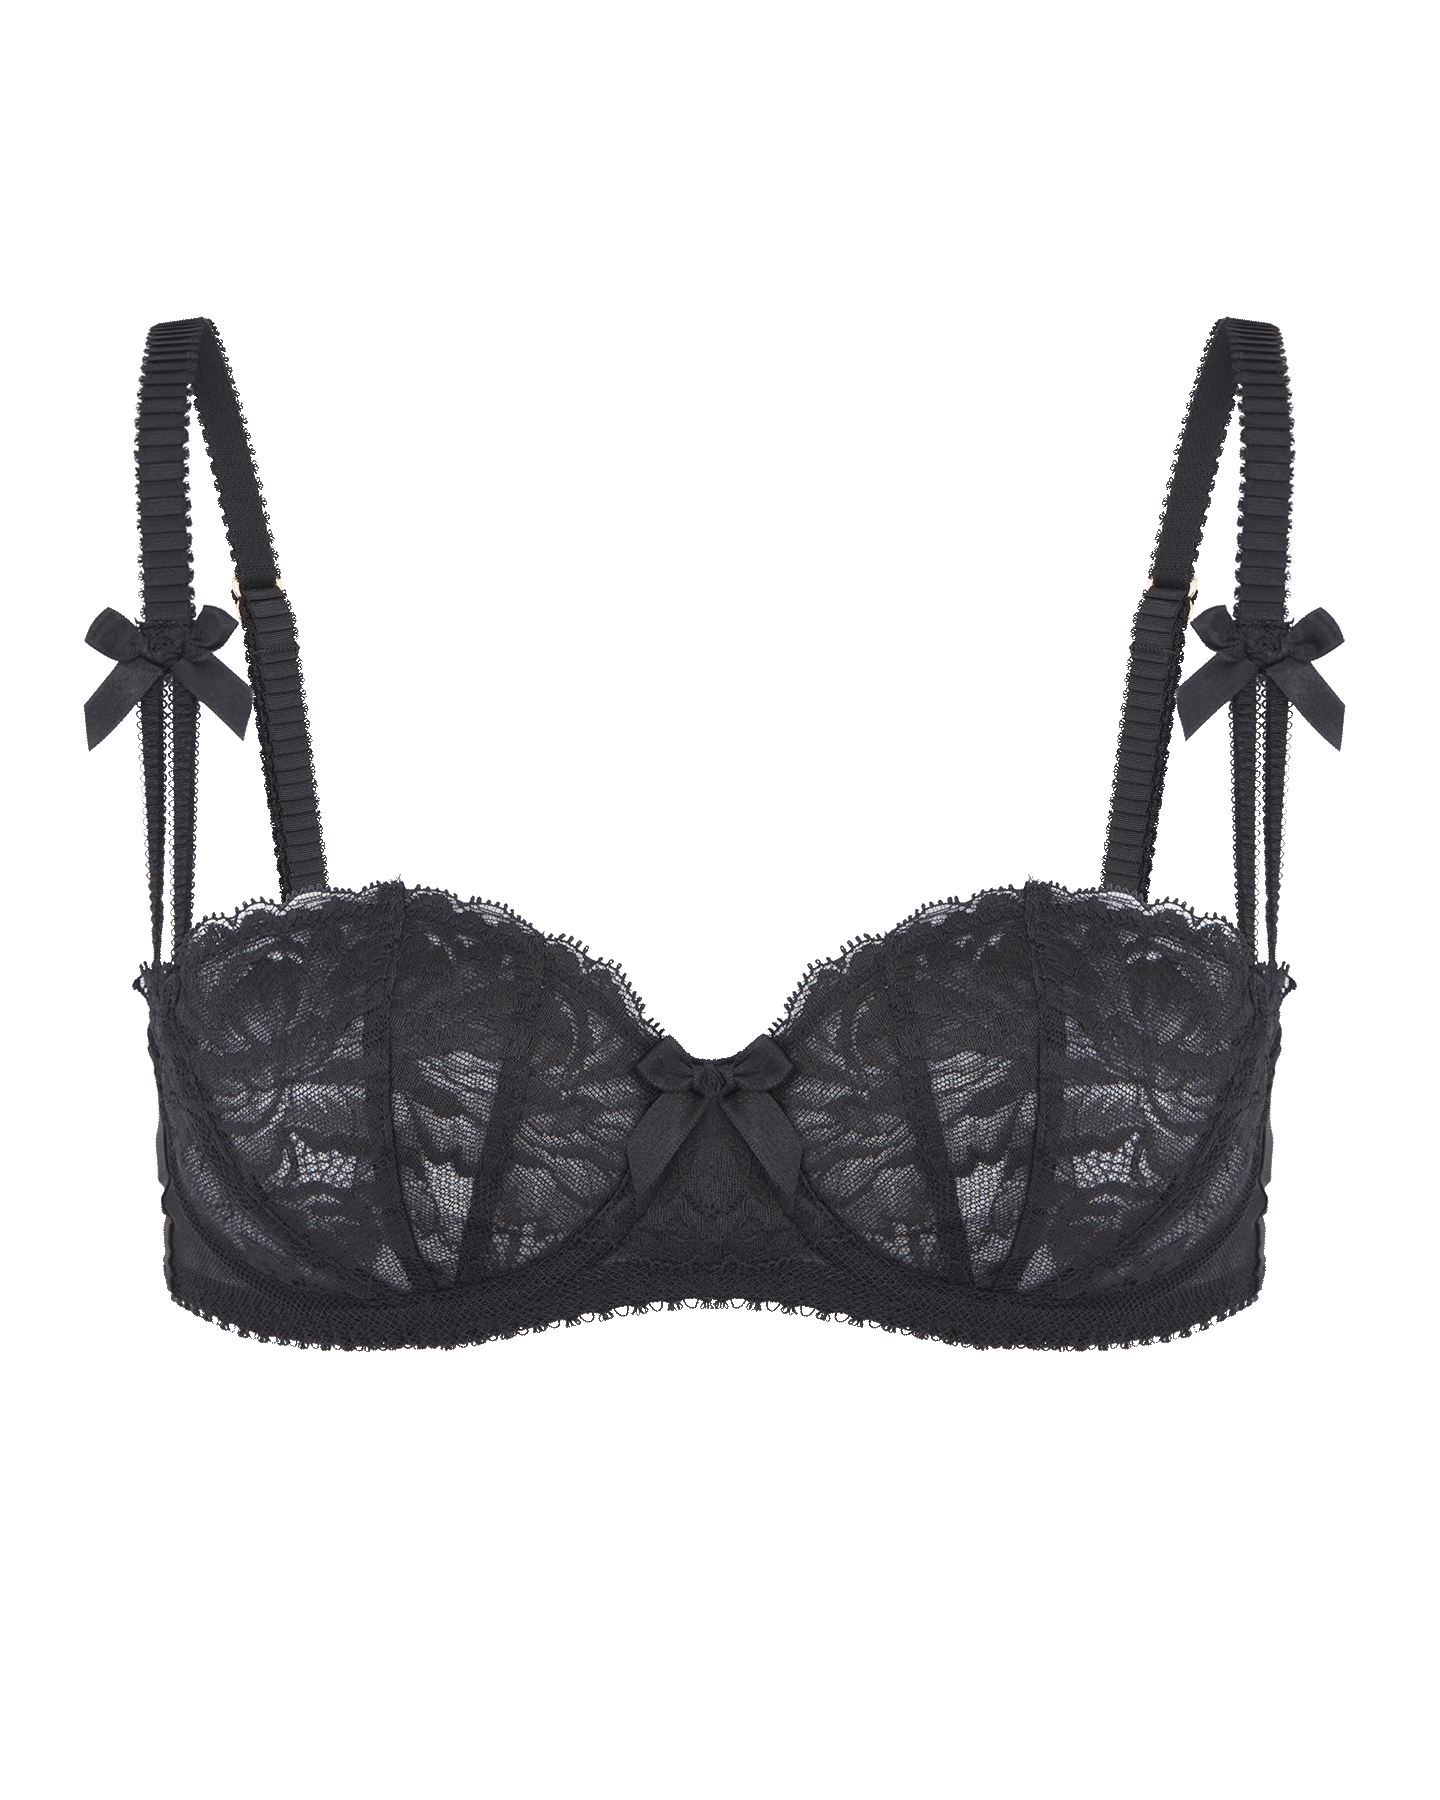 Lacy Balconette Underwired Bra in Black | By Agent Provocateur Outlet